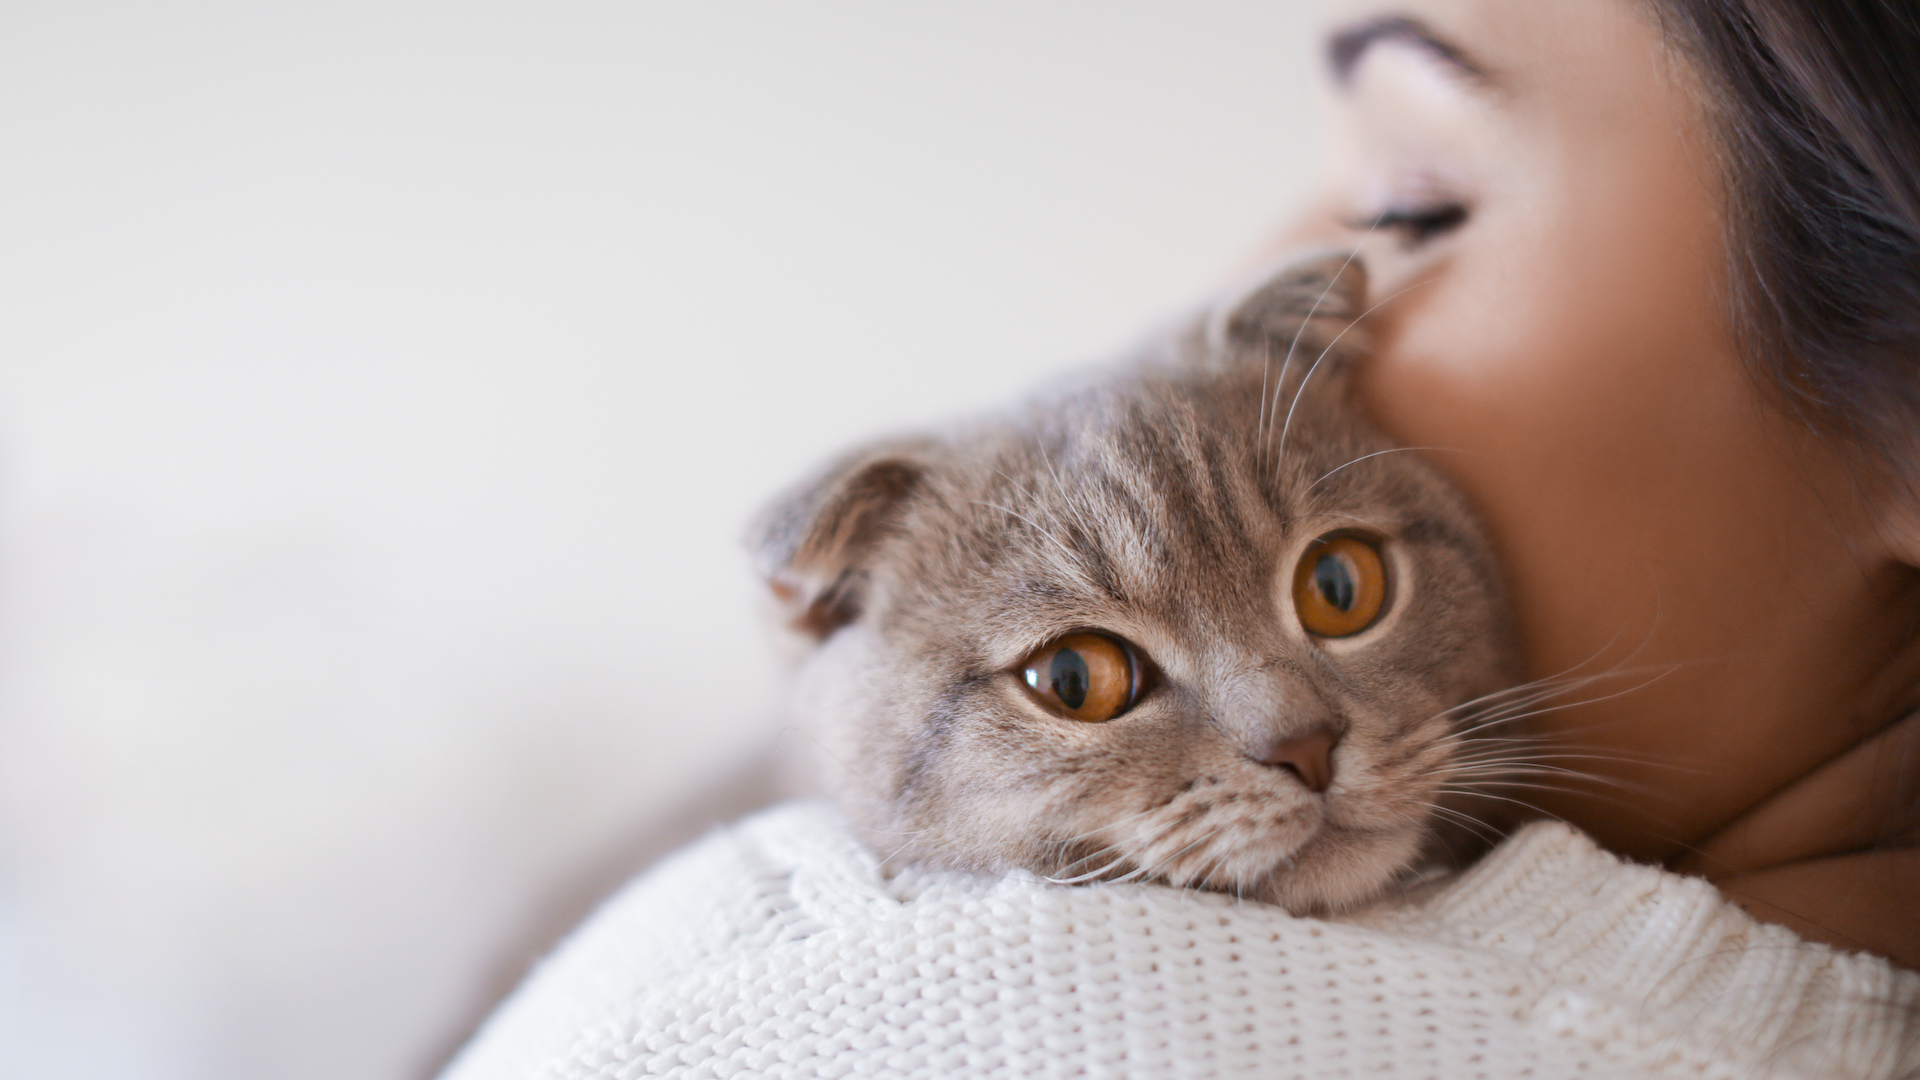  Cats love to meow at humans. Now we know why. 